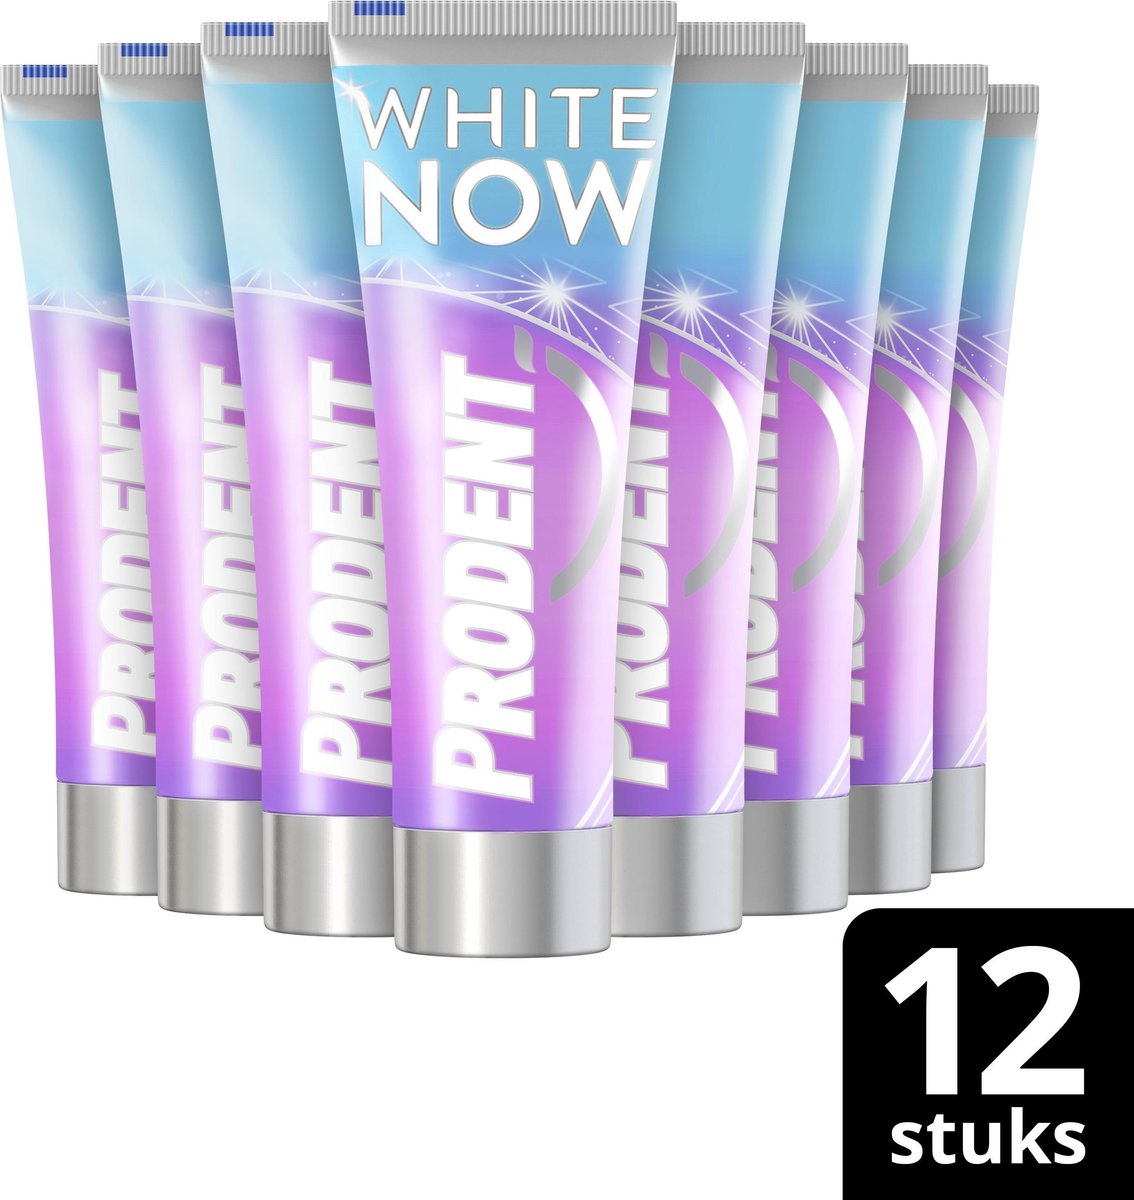 Prodent White Now Glossy Chic Tandpasta - 12 x 75 ml - Voordeelverpakking - Prodent